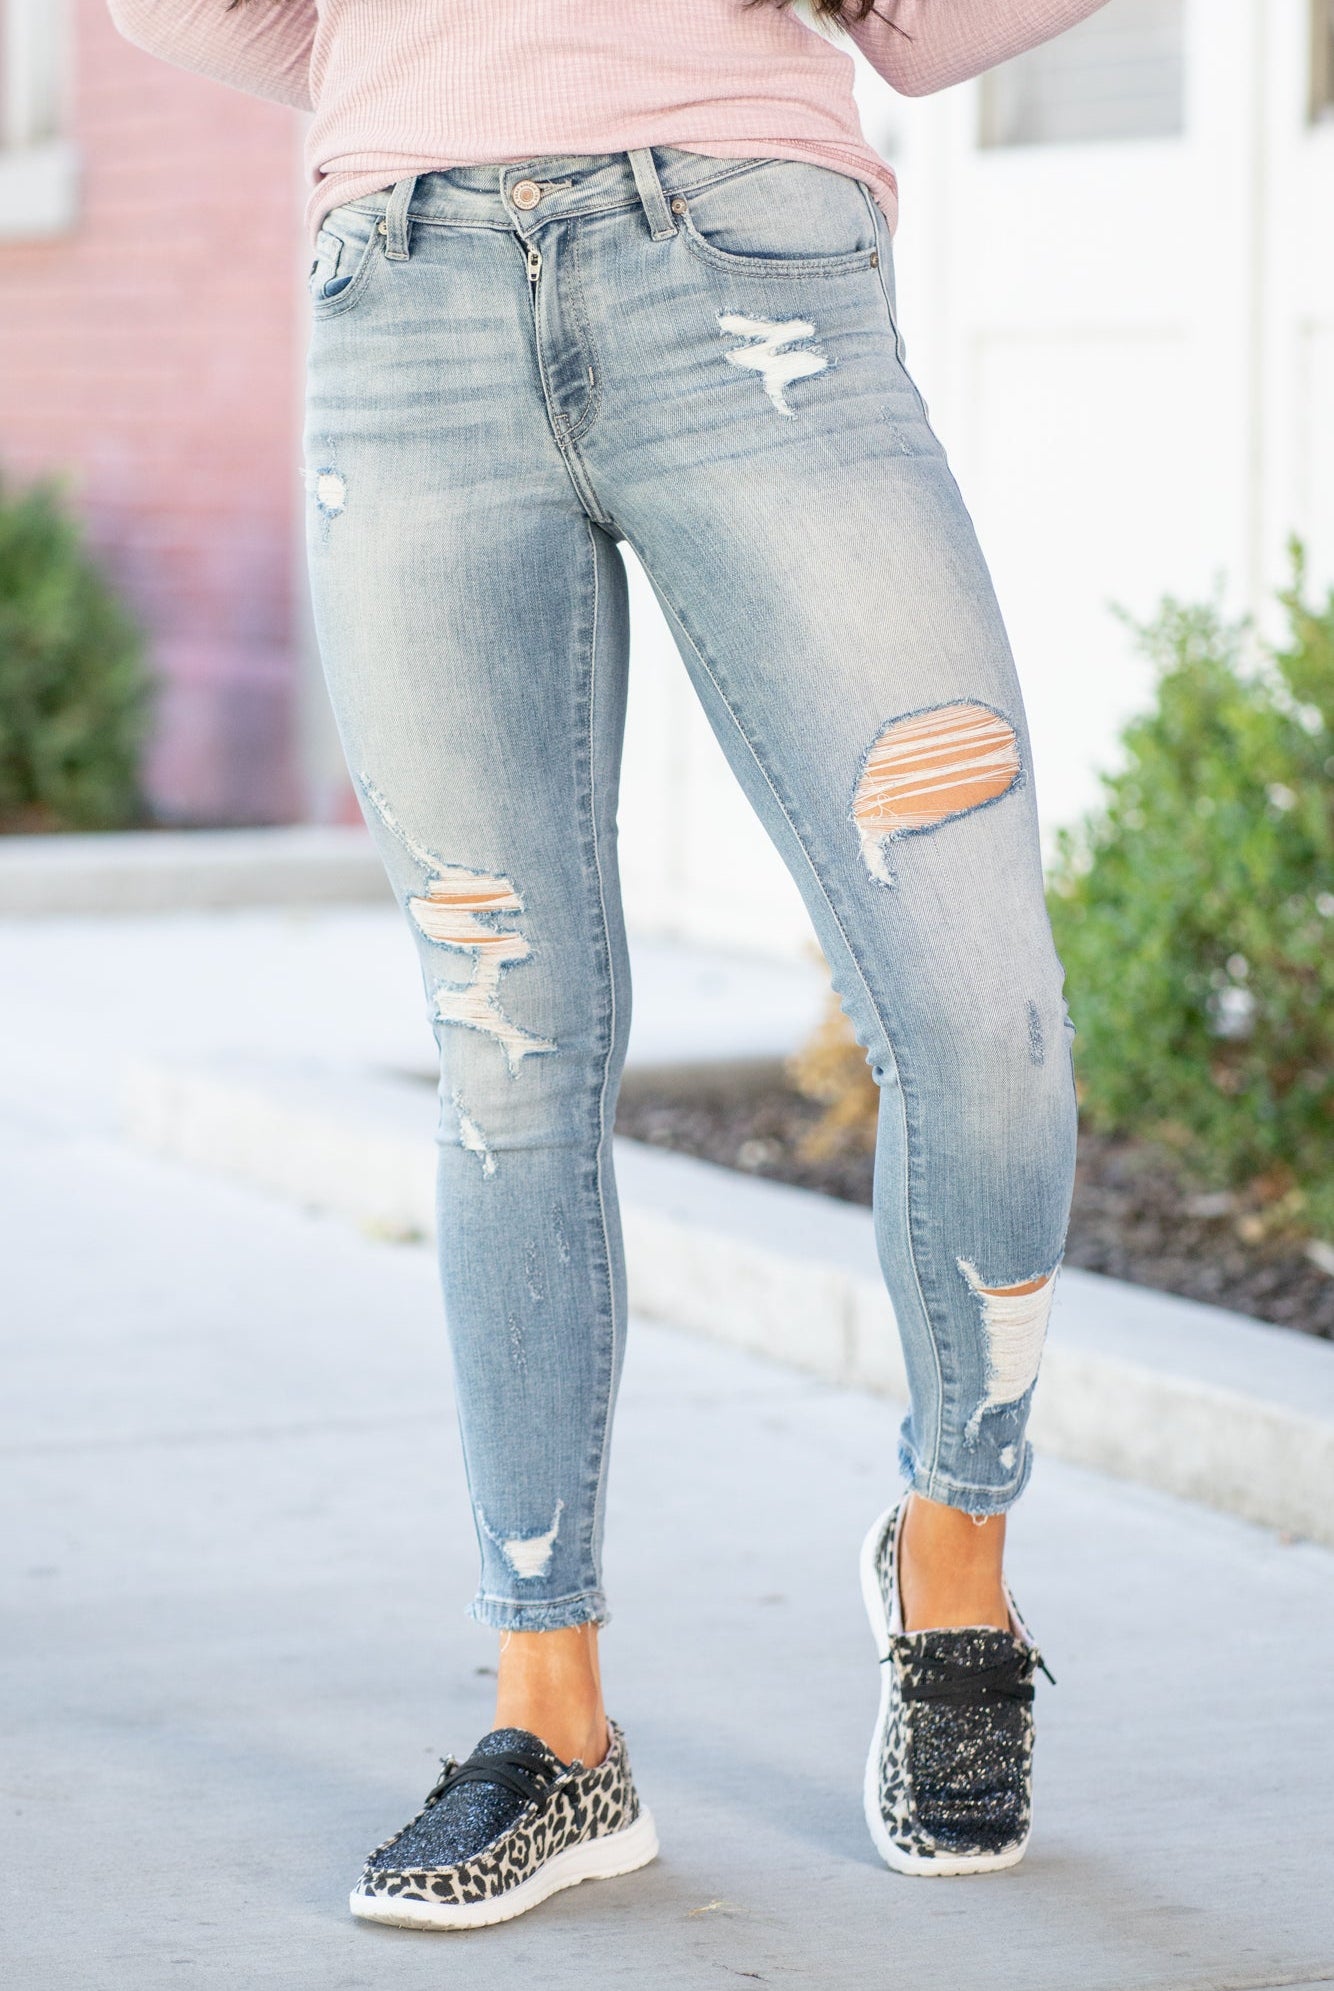 Kan Can Jeans Style Name: Austin Color: Medium Wash Cut: Ankle Skinny Rise: Mid-Rise, 8.5" Front Rise* Inseam: 27" INSEAM* 74% COTTON 15% POLYESTER 10% RAYON 1% SPANDEX Machine Wash Separately In Cold Water Stitching: Classic Fly: Zipper Style #: KC8319SDM Contact us for any additional measurements or sizing.